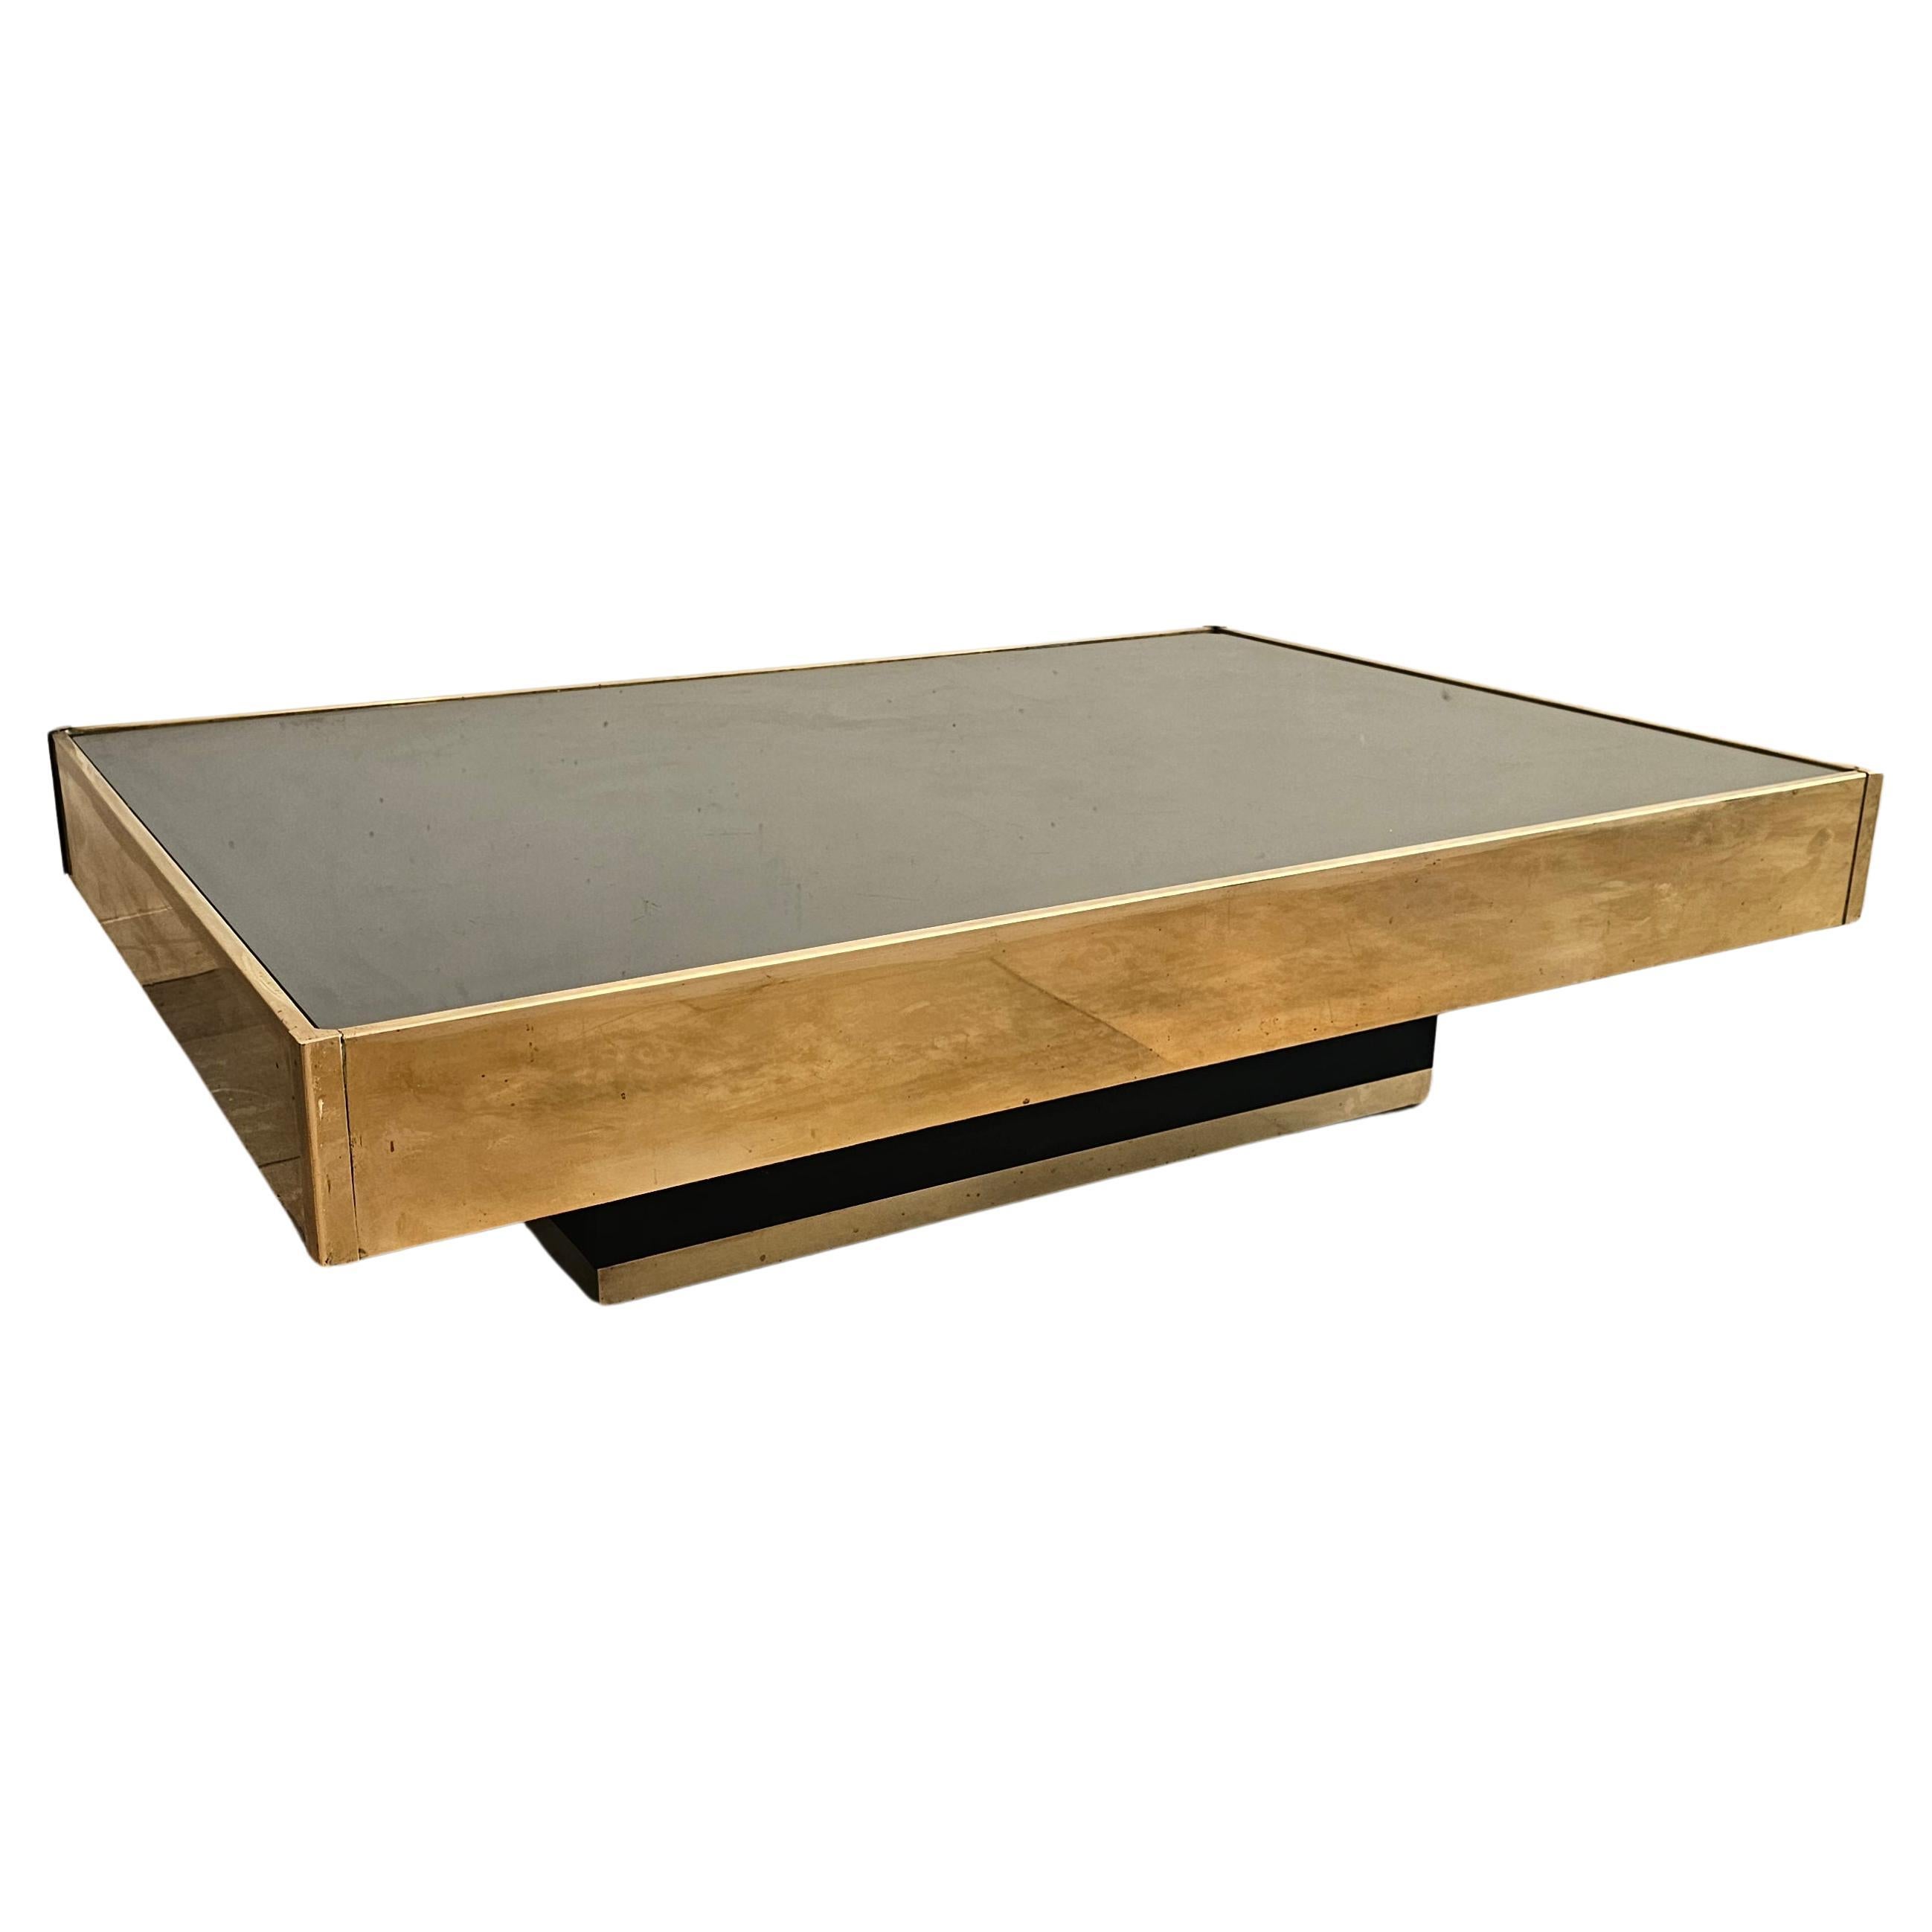 Square Mirorred coffeetable by "Willy Rizzo" for "Cidue" with Brass Details